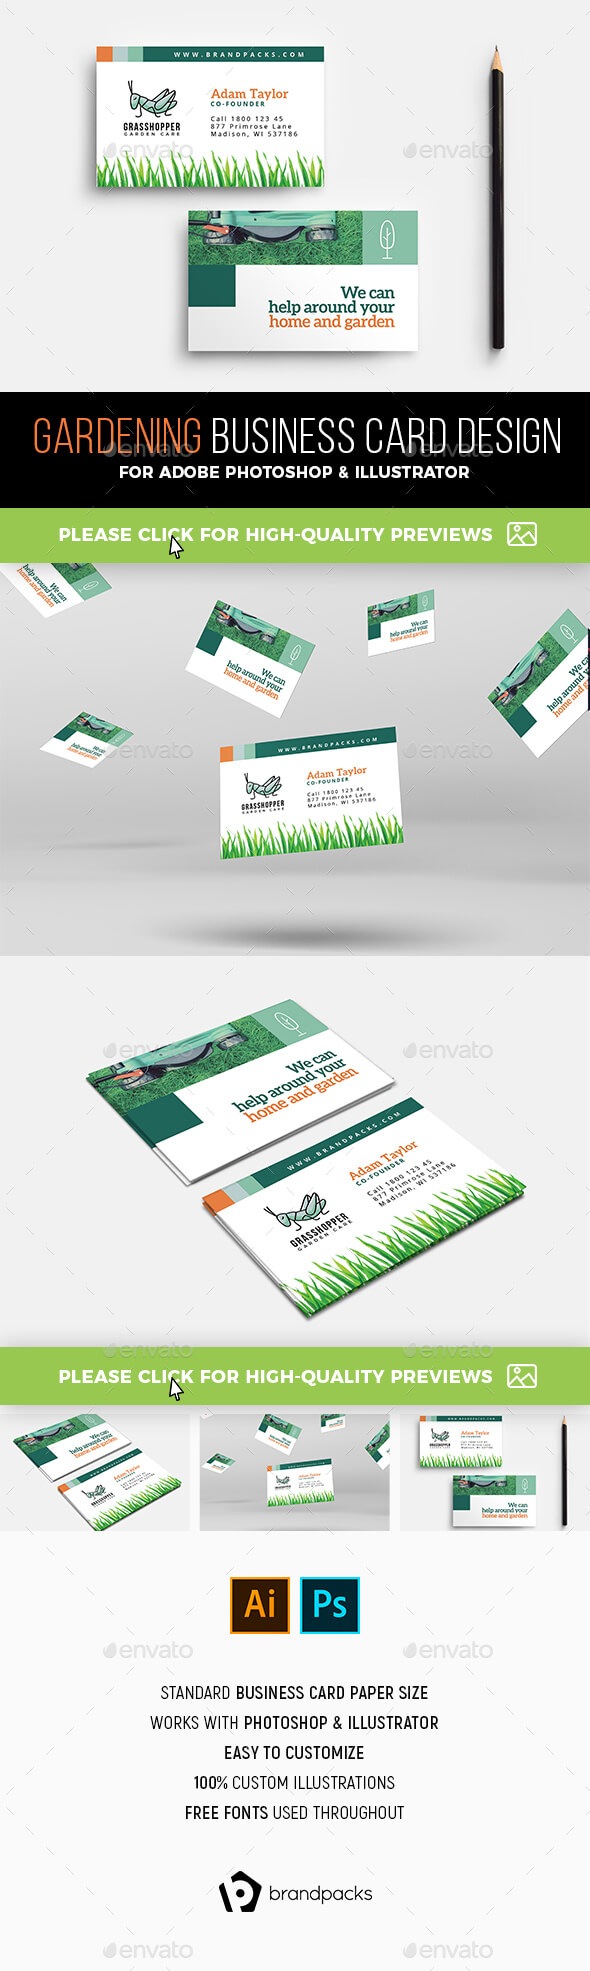 Gardening Business Card Templates & Designs From Graphicriver Pertaining To Gardening Business Cards Templates